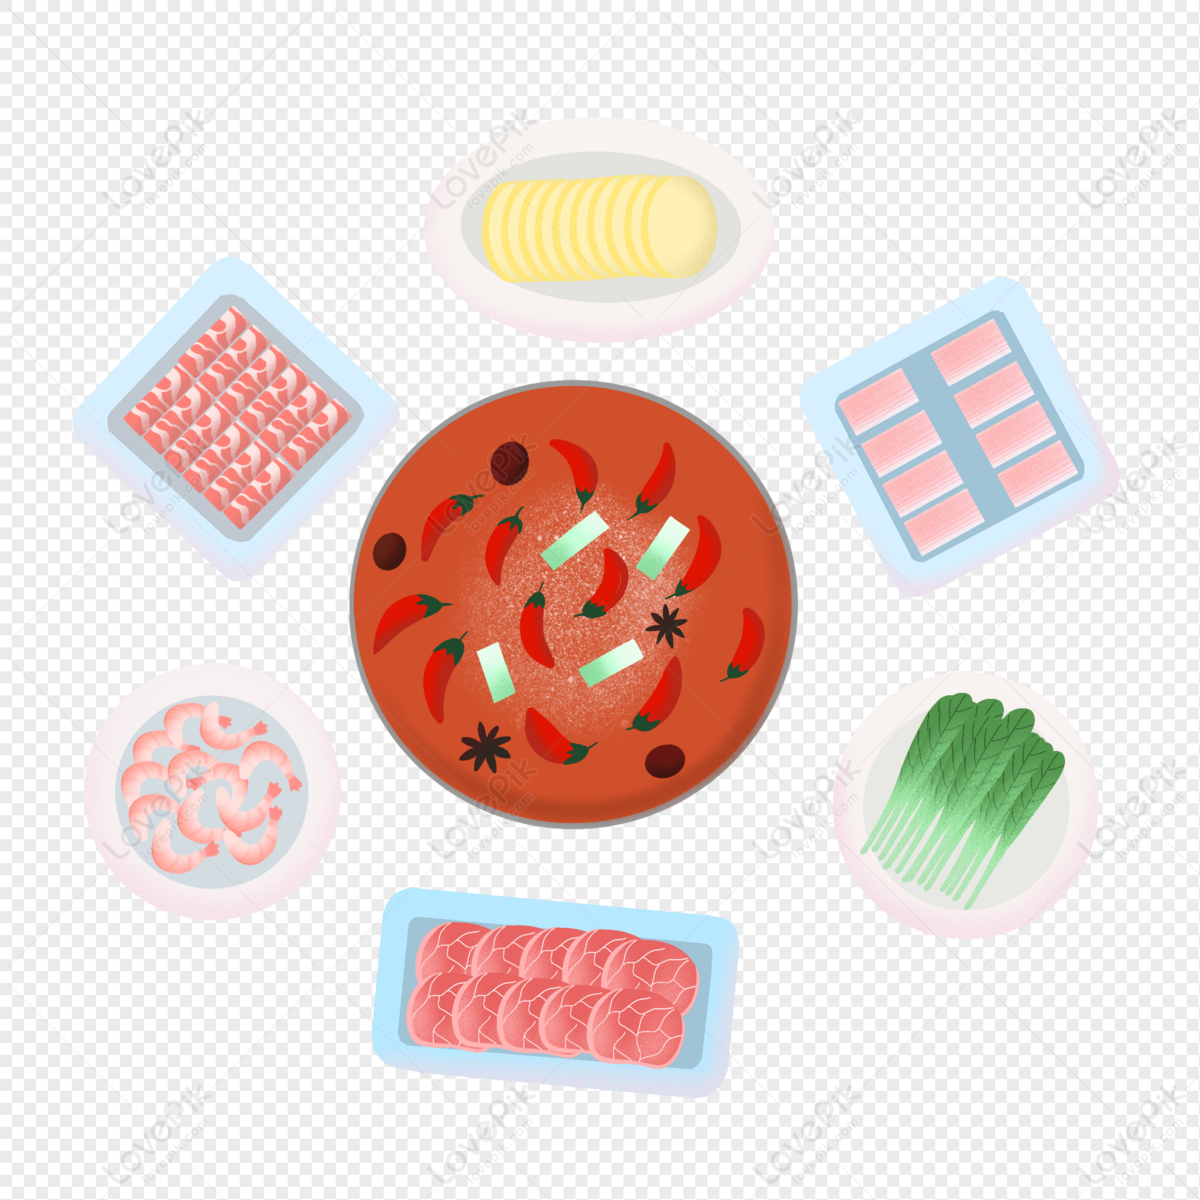 Hot Pot Cartoon PNG Image And Clipart Image For Free Download - Lovepik |  401327038